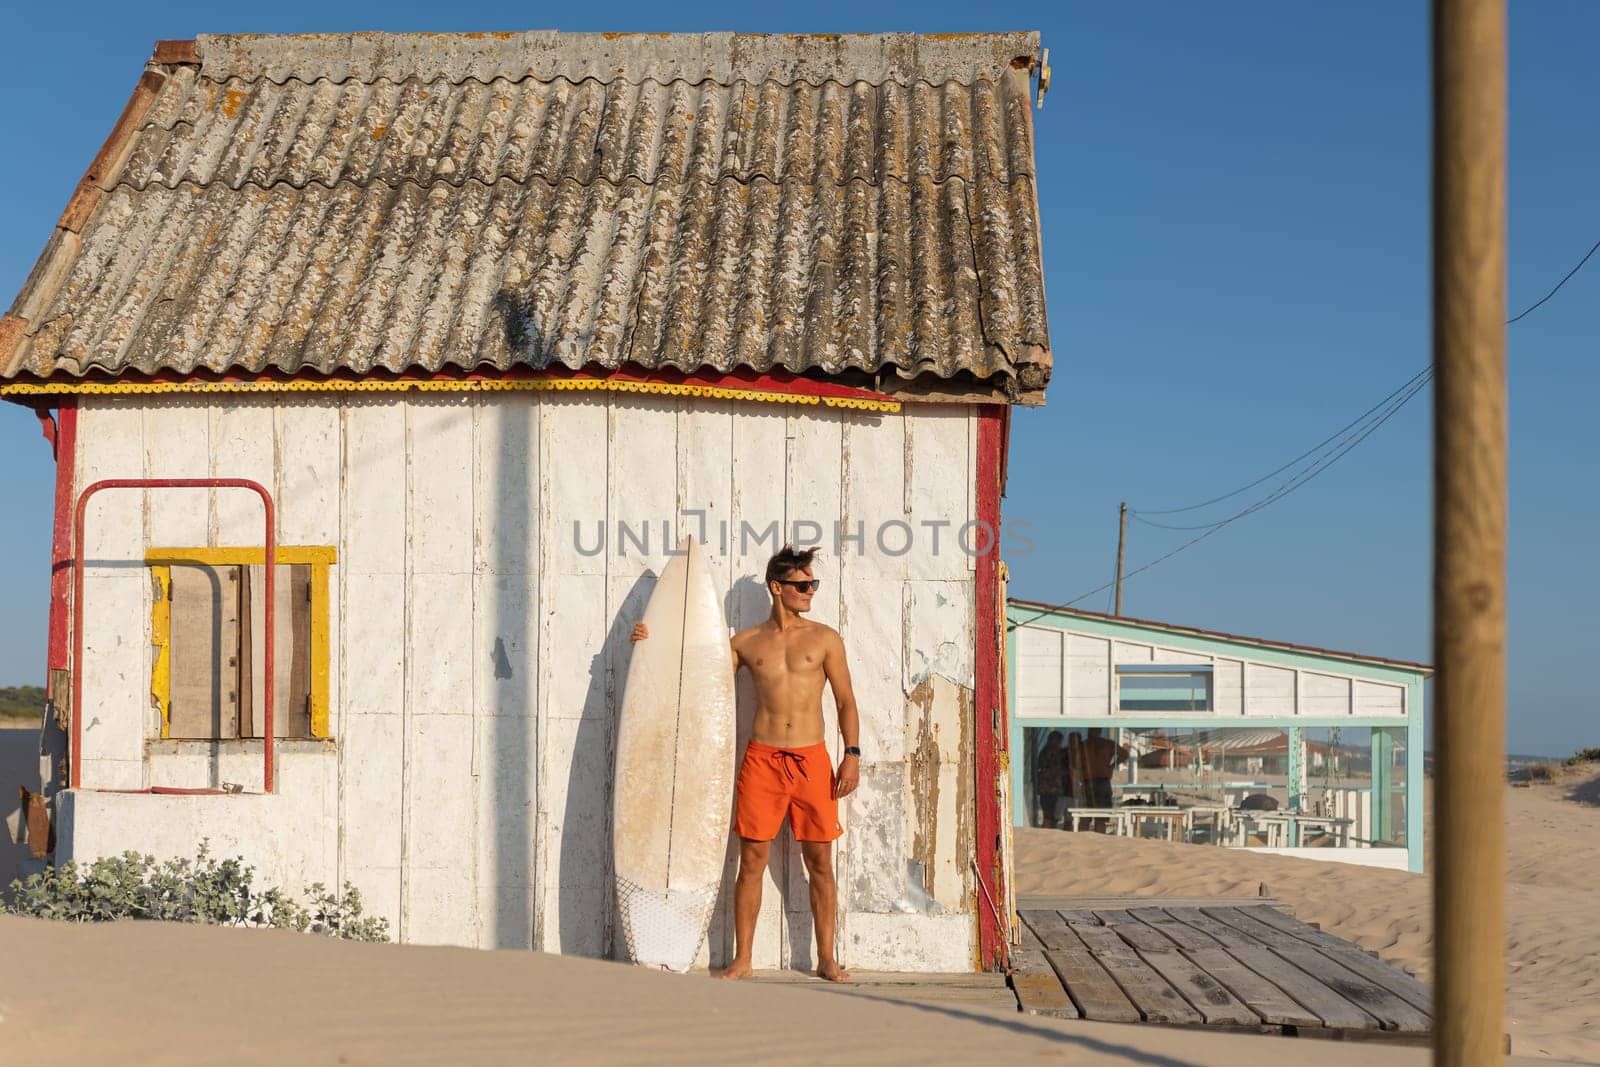 A man with nice athletic body standing at the shore house on the beach with his surfboard - looking to the side. Mid shot